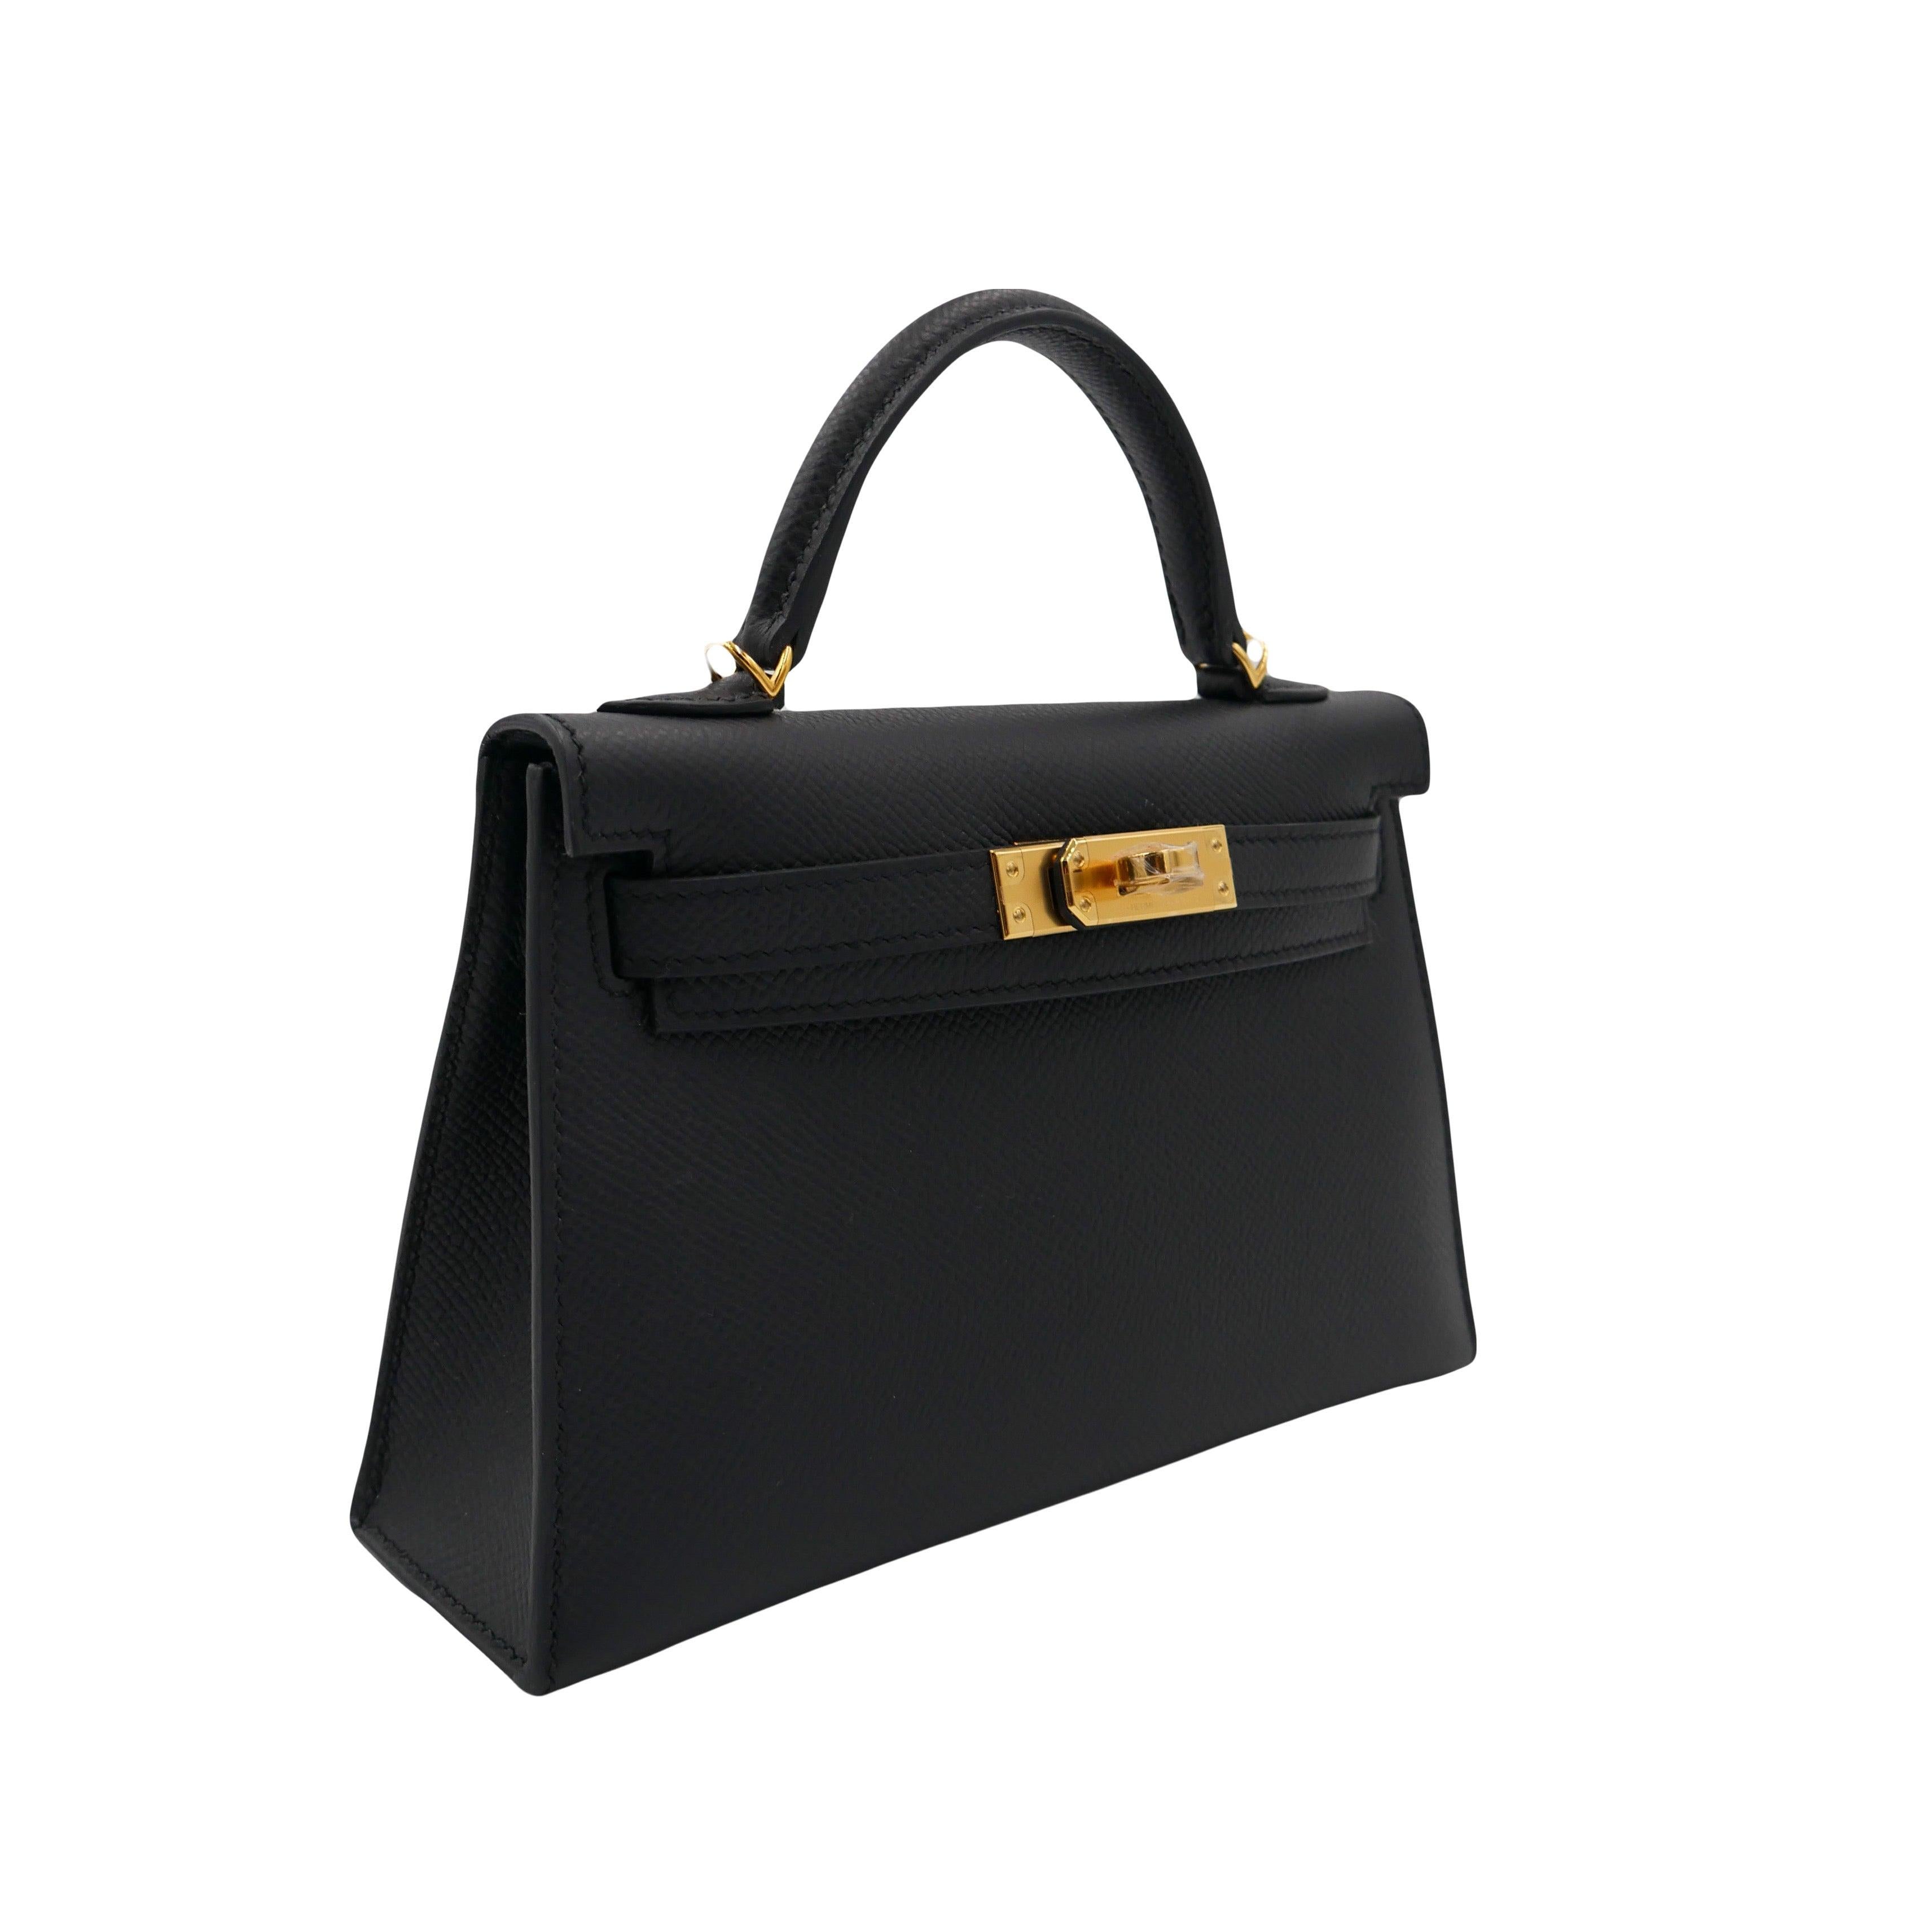 Brand: Hermès
Style: Kelly II Sellier Mini
Size: 20cm
Color: Black
Material: Epsom Leather
Hardware: Gold Hardware(GHW)
Dimensions: 7.5